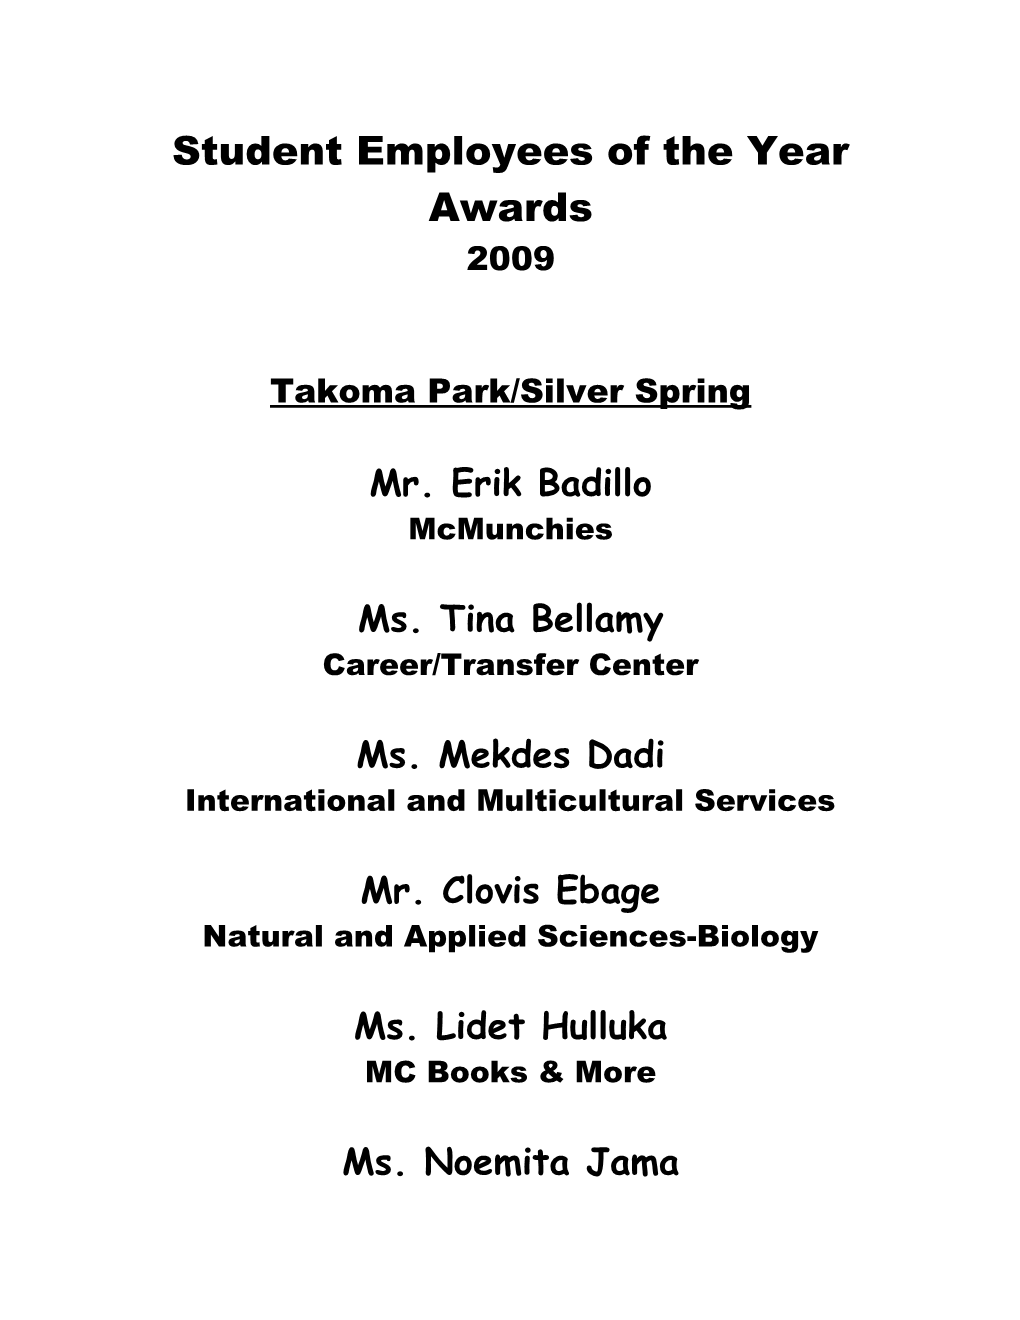 Student Employees of the Year Awards